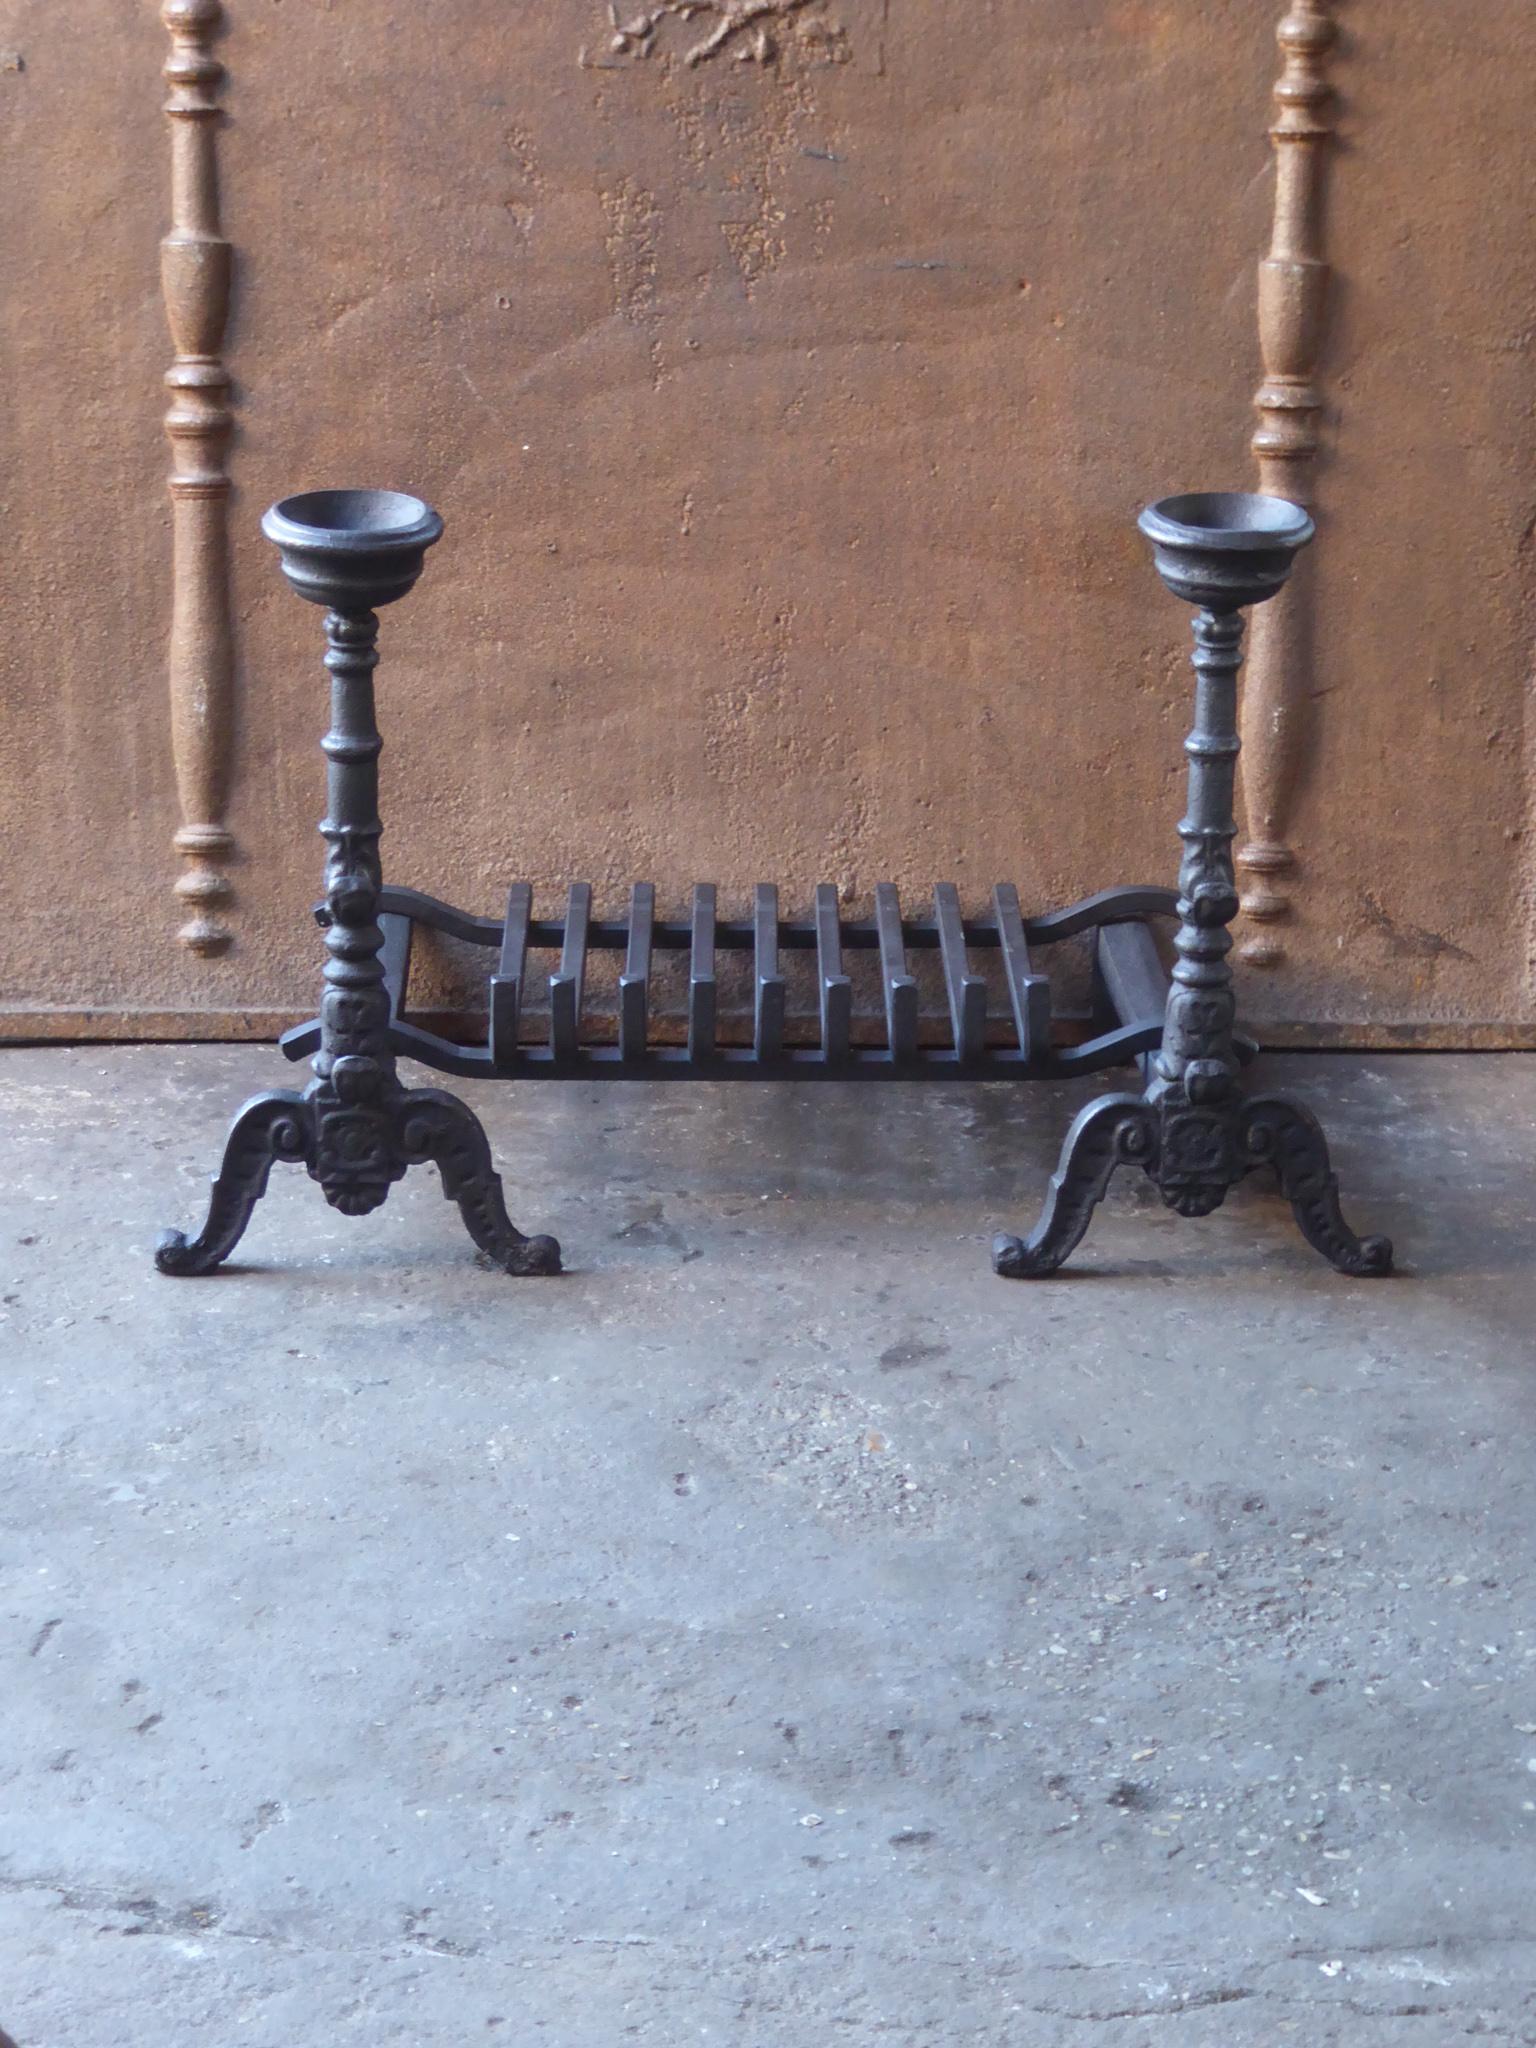 20th century French Neo-gothic fireplace basket - fire basket made of wrought iron and cast iron. The basket is in a good condition and is fully functional. The total width of the front of the fireplace grate is 70.0 cm or 27.6 inch.